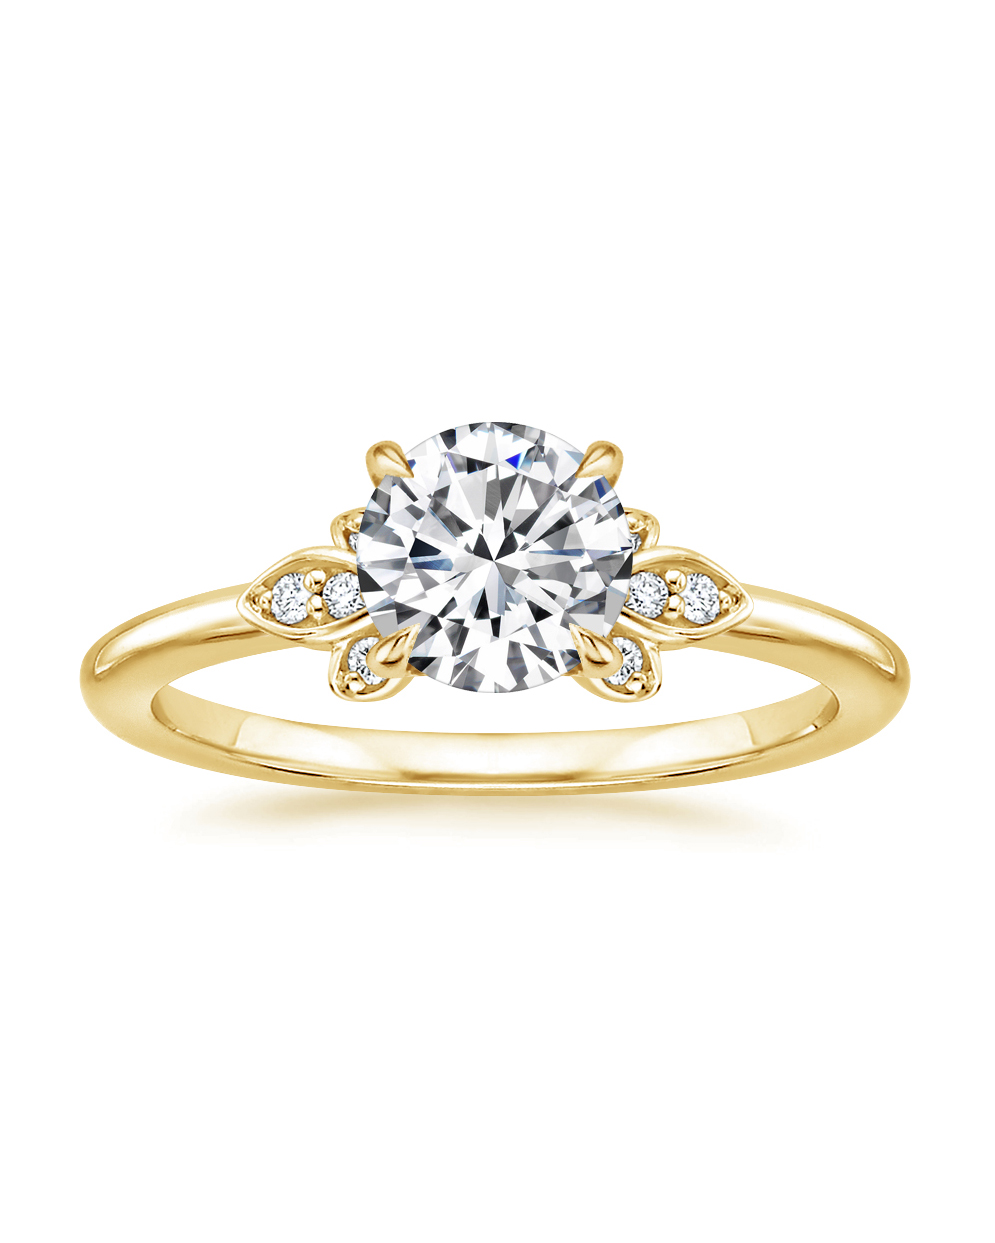 15 Diamond Engagement Rings Under $5,000 - Only Natural Diamonds